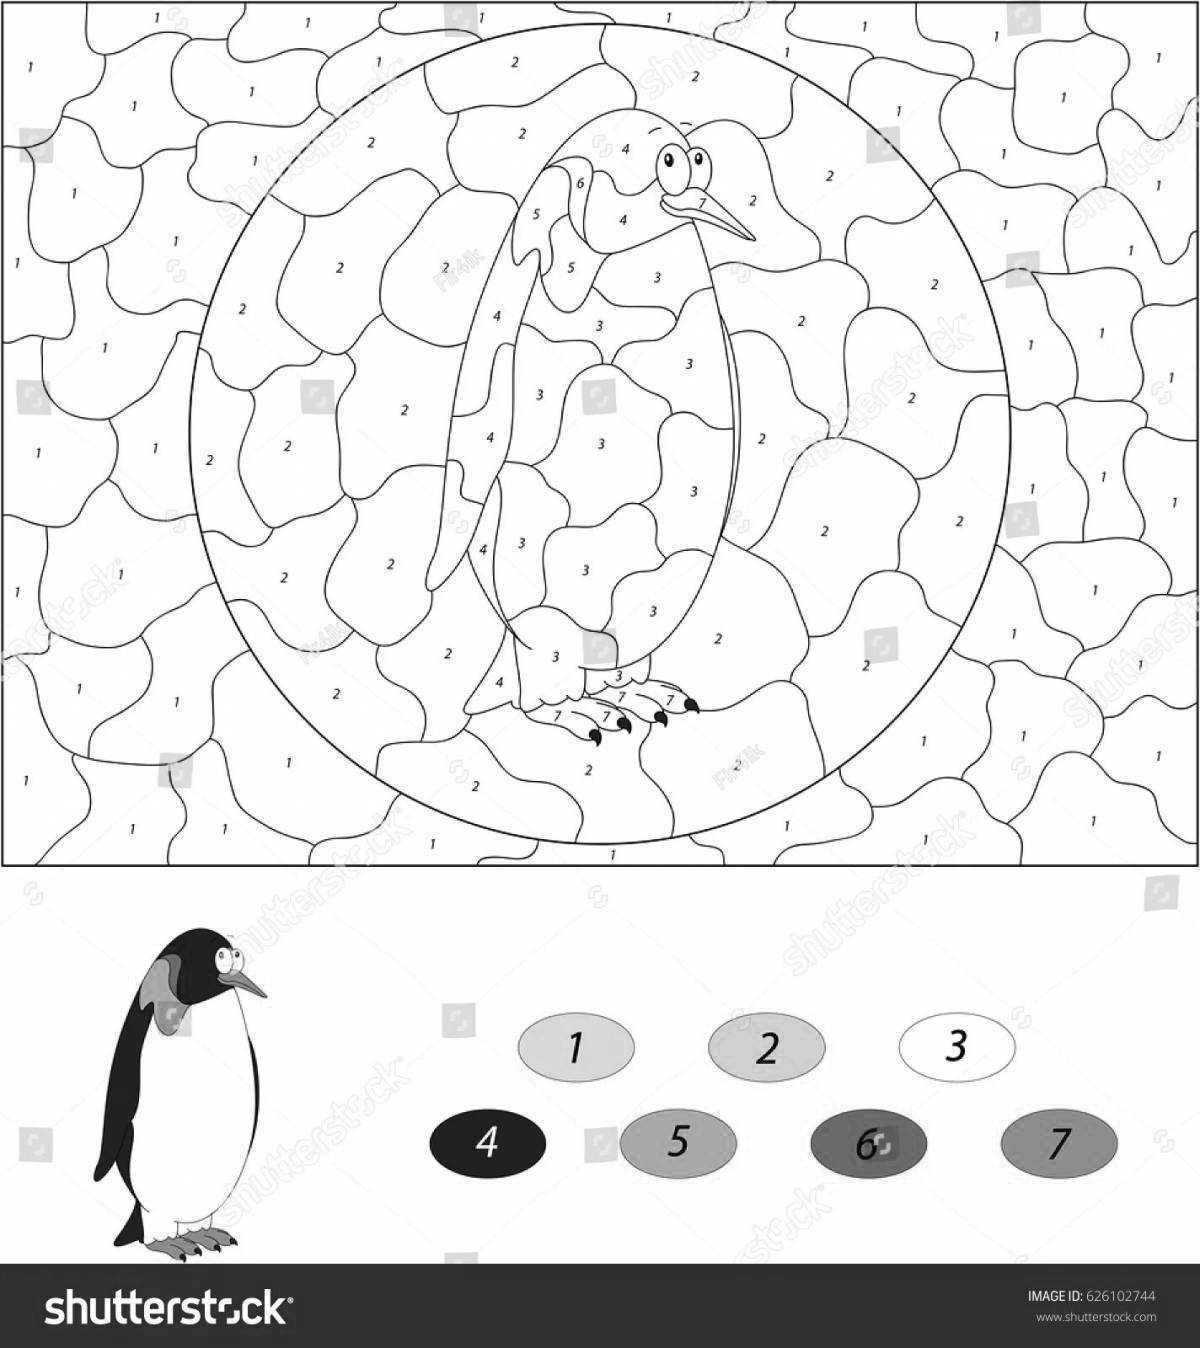 Colour Mad Penguin by Numbers Coloring Pages